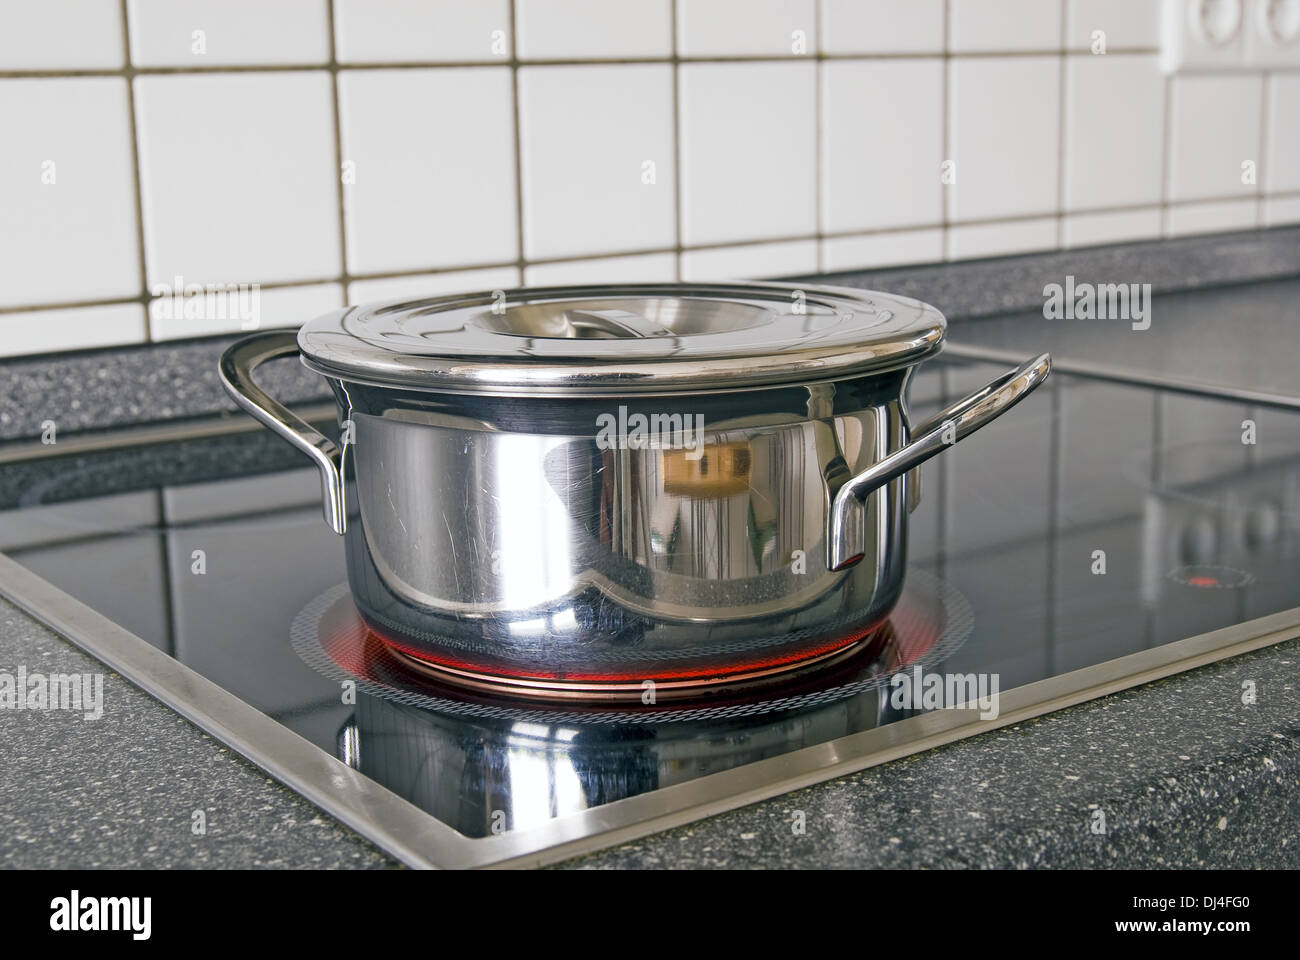 Cooking pot on stove Stock Photo